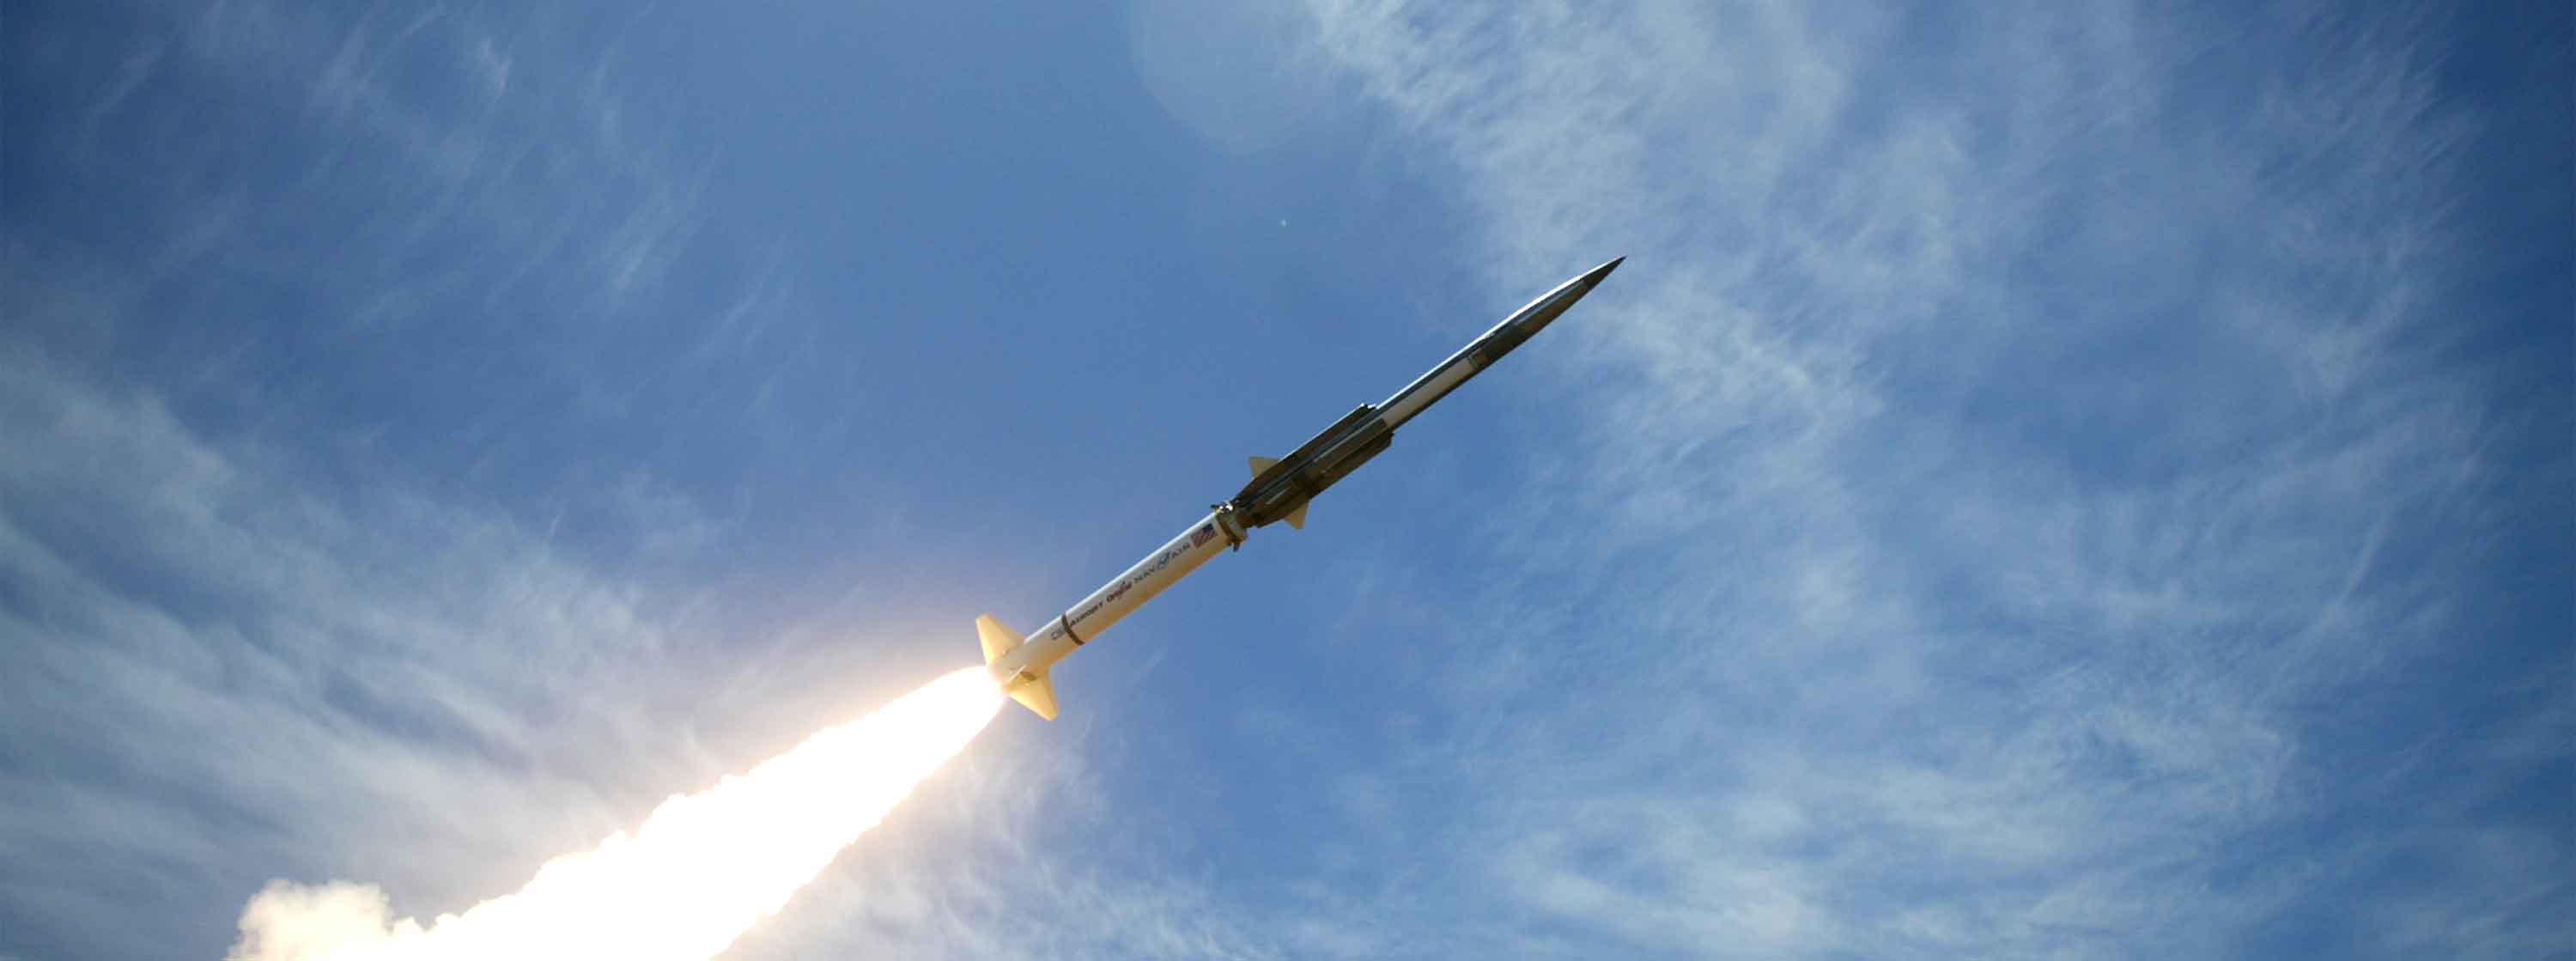 A missile launches into the air